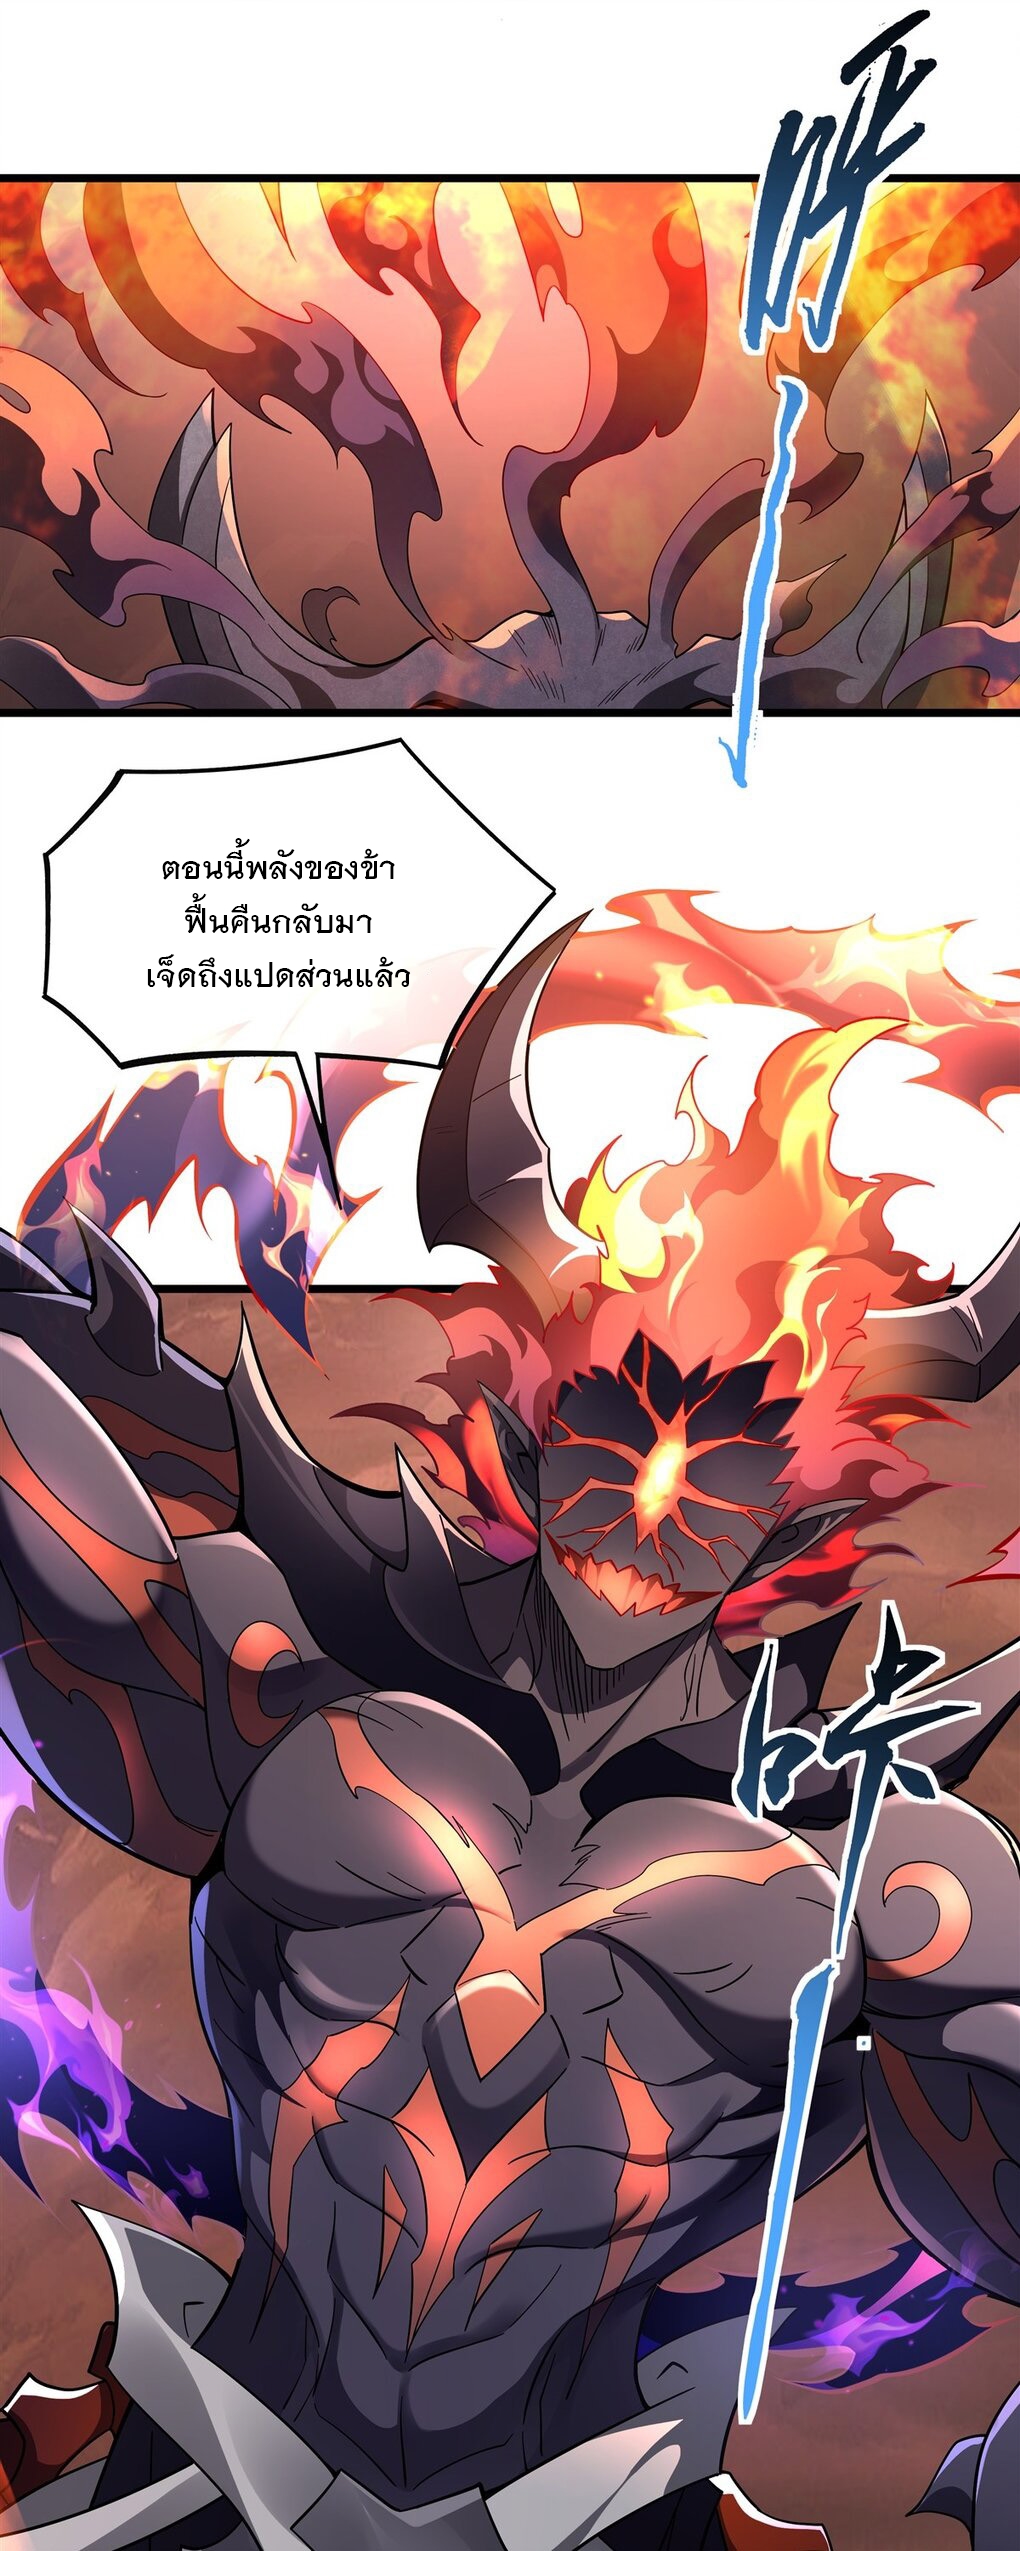 My Female Apprentices Are All Big Shots From the Future Ã Â¸â€¢Ã Â¸Â­Ã Â¸â„¢Ã Â¸â€”Ã Â¸ÂµÃ Â¹Ë† 97 (15)